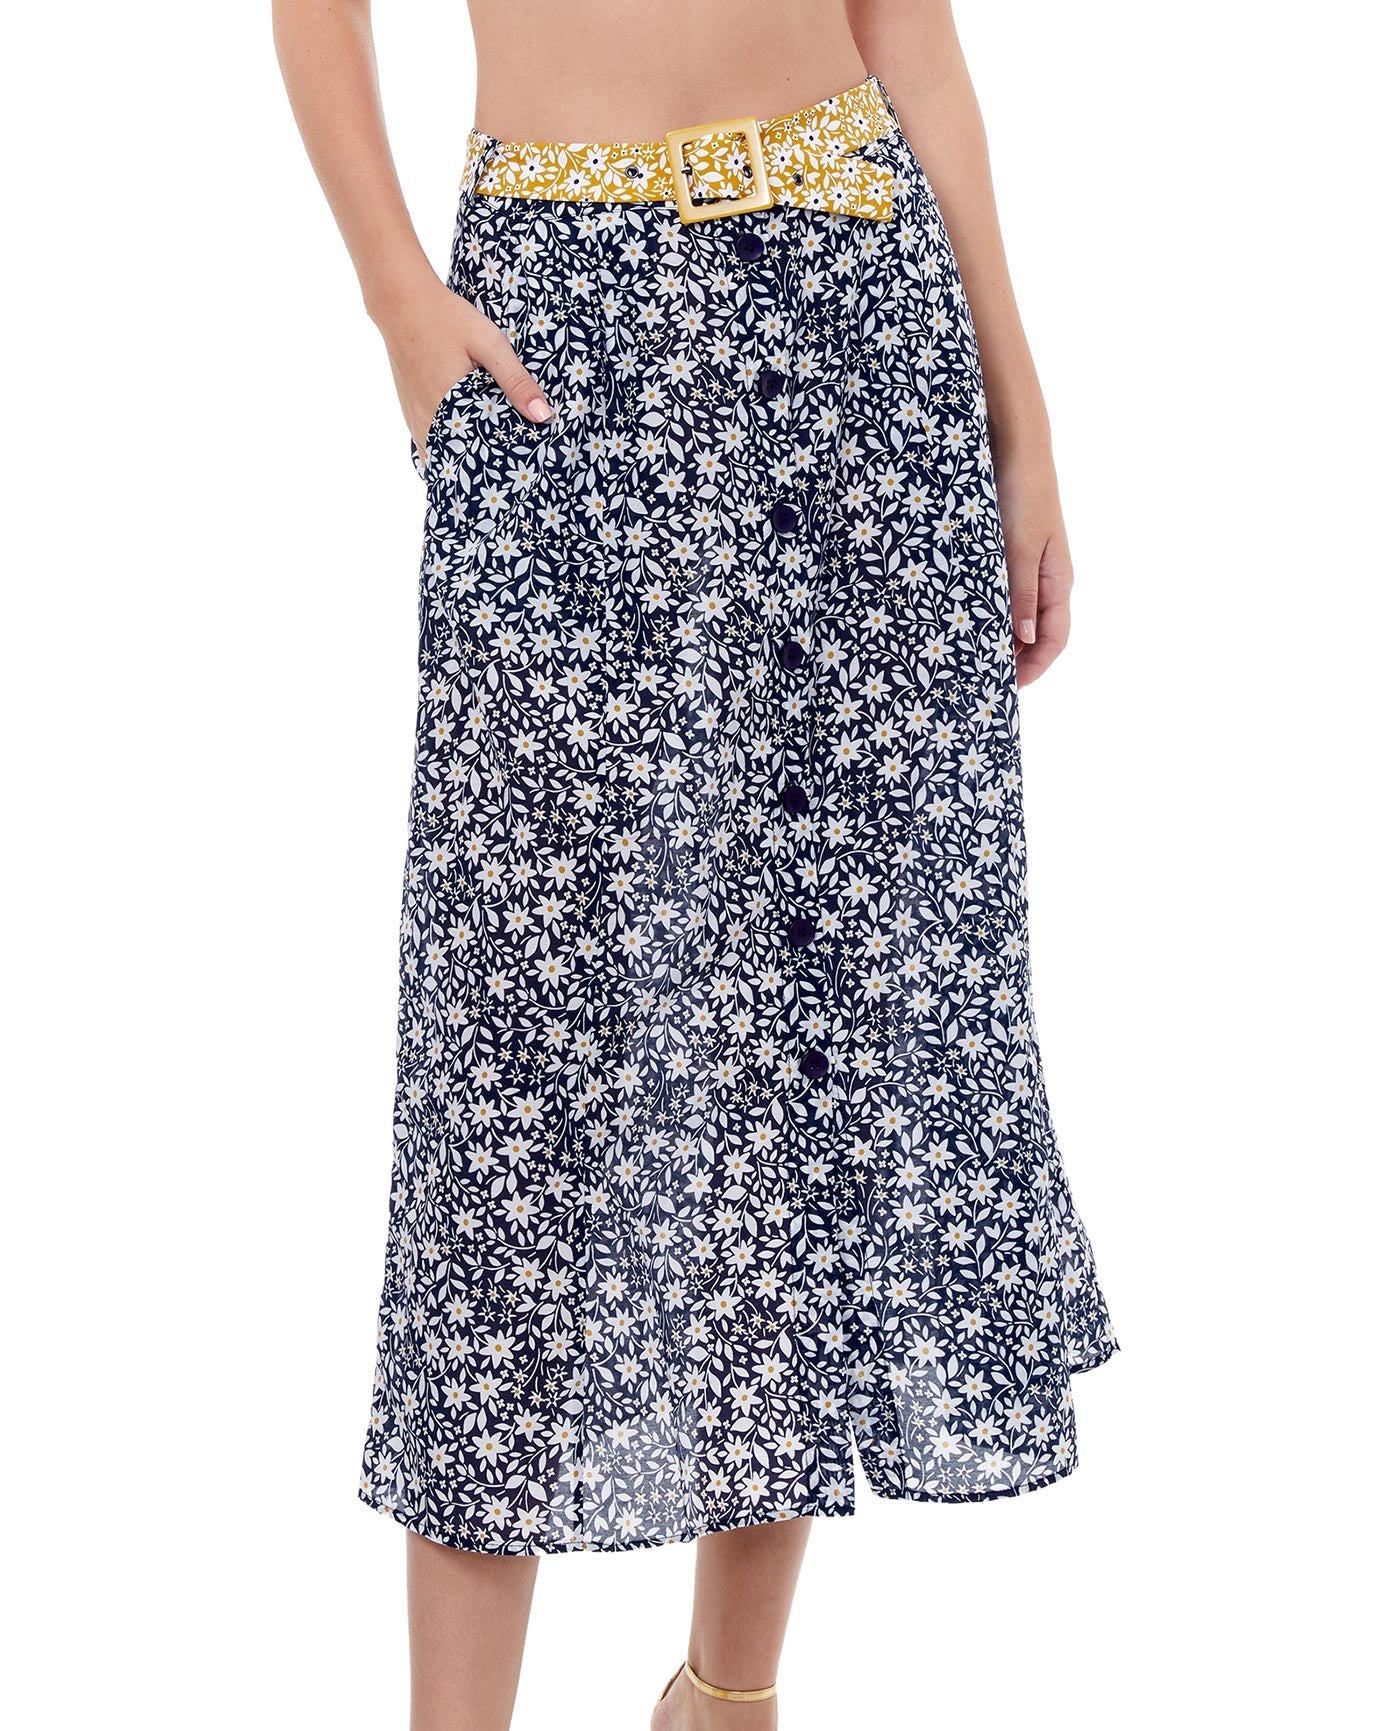 Front View Of Luma Shimmering Daisies Long Cover Up Skirt | LUMA SHIMMERING DAISIES NAVY AND GOLD